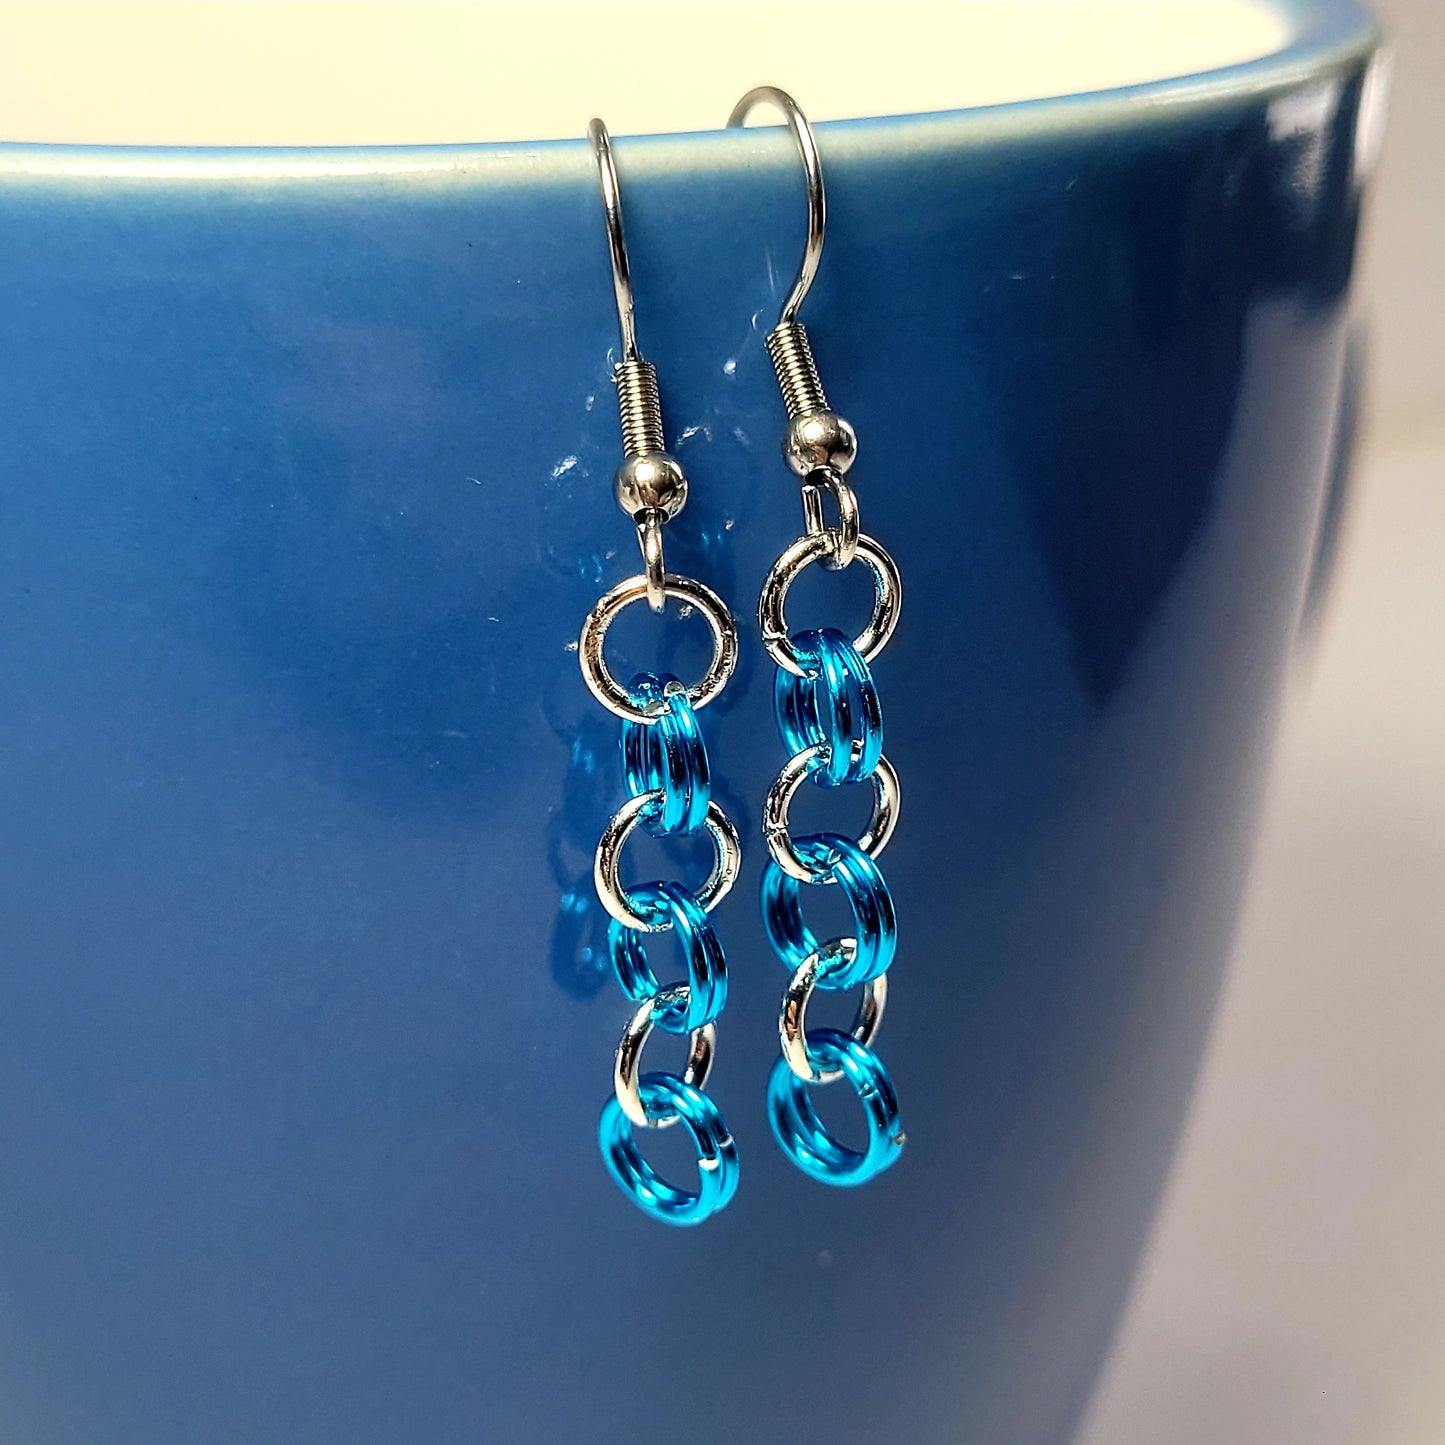 Earrings, blue and silver chainmail